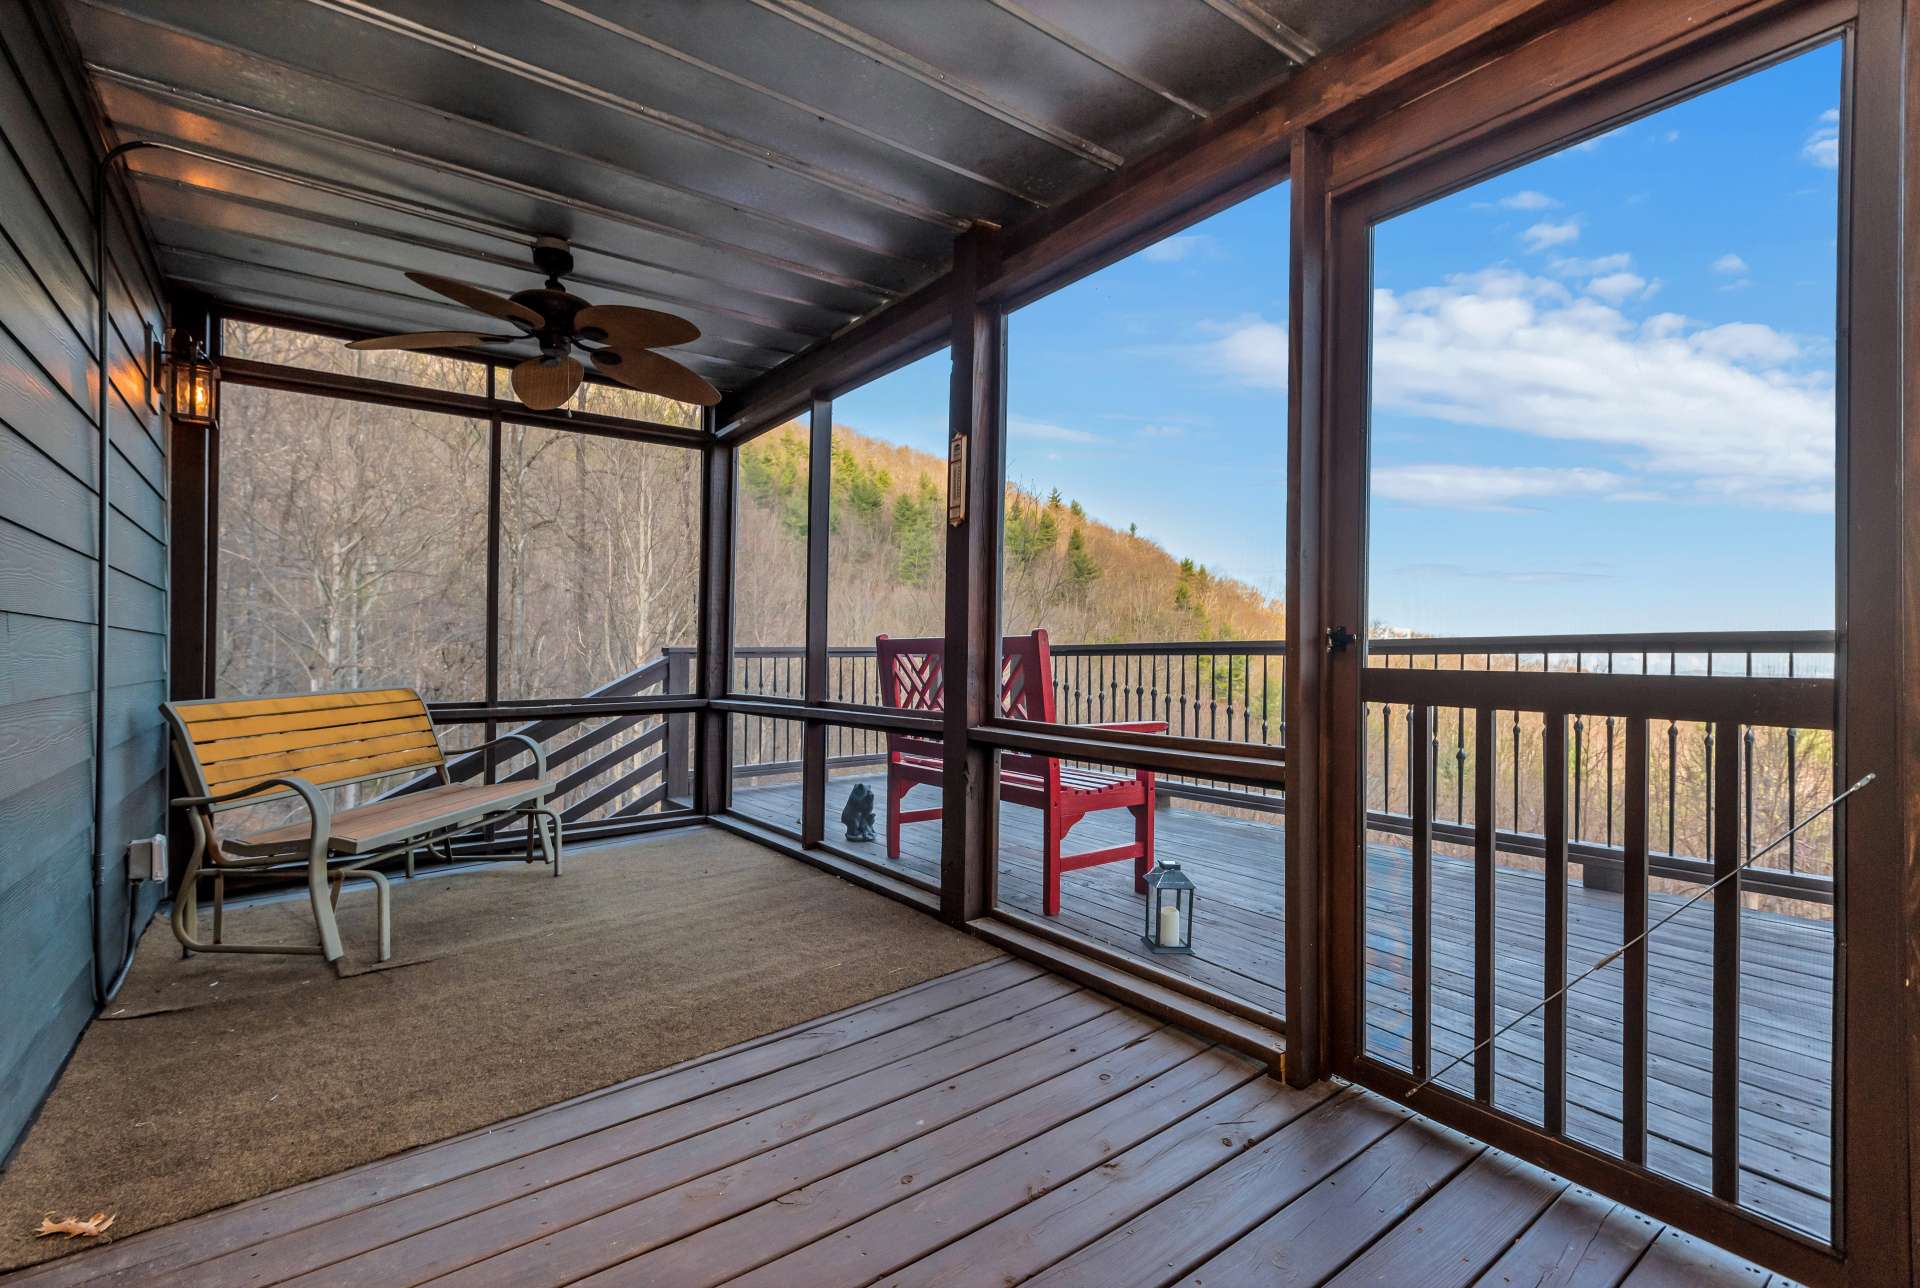 Screened in porch off of the living room is a great place for outdoor dining and enjoying the fresh mountain air.